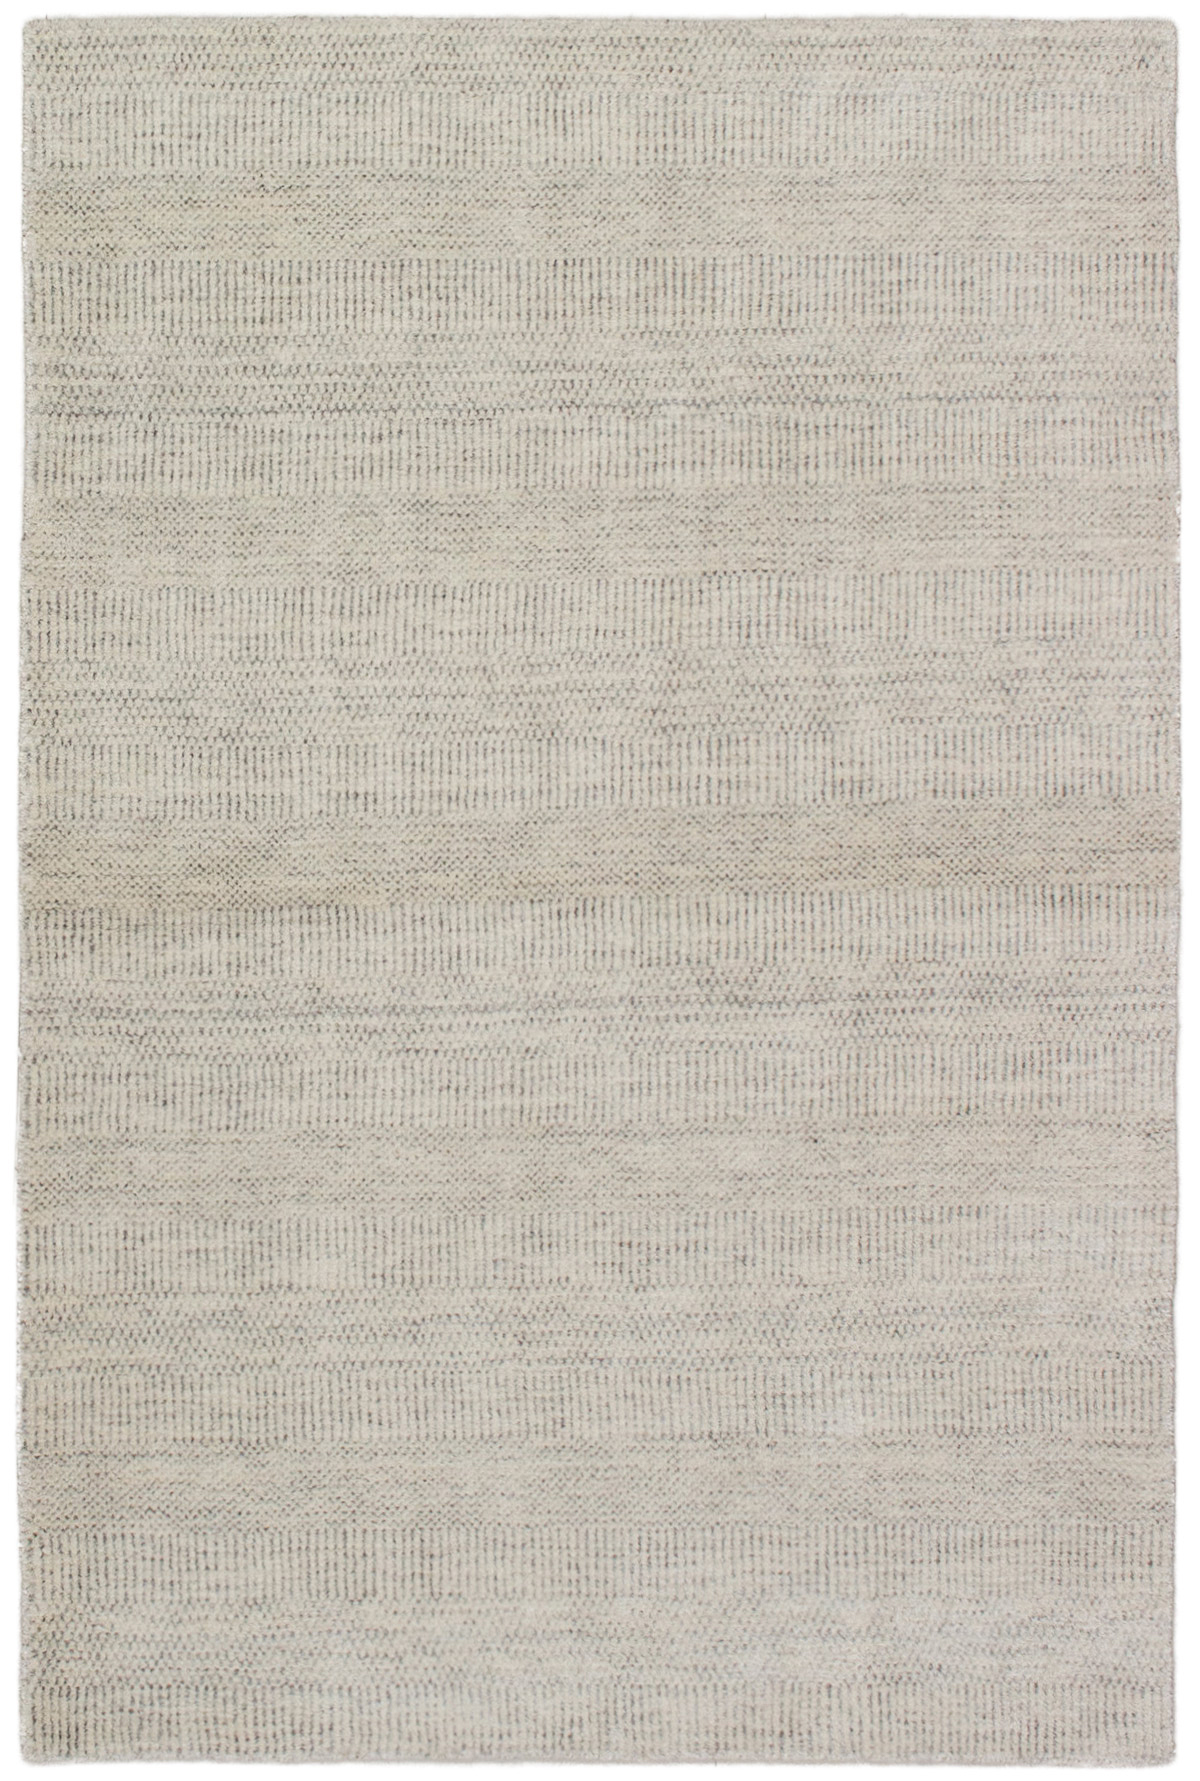 Hand-knotted Pearl Grey  Rug 4'0" x 6'0" Size: 4'0" x 6'0"  